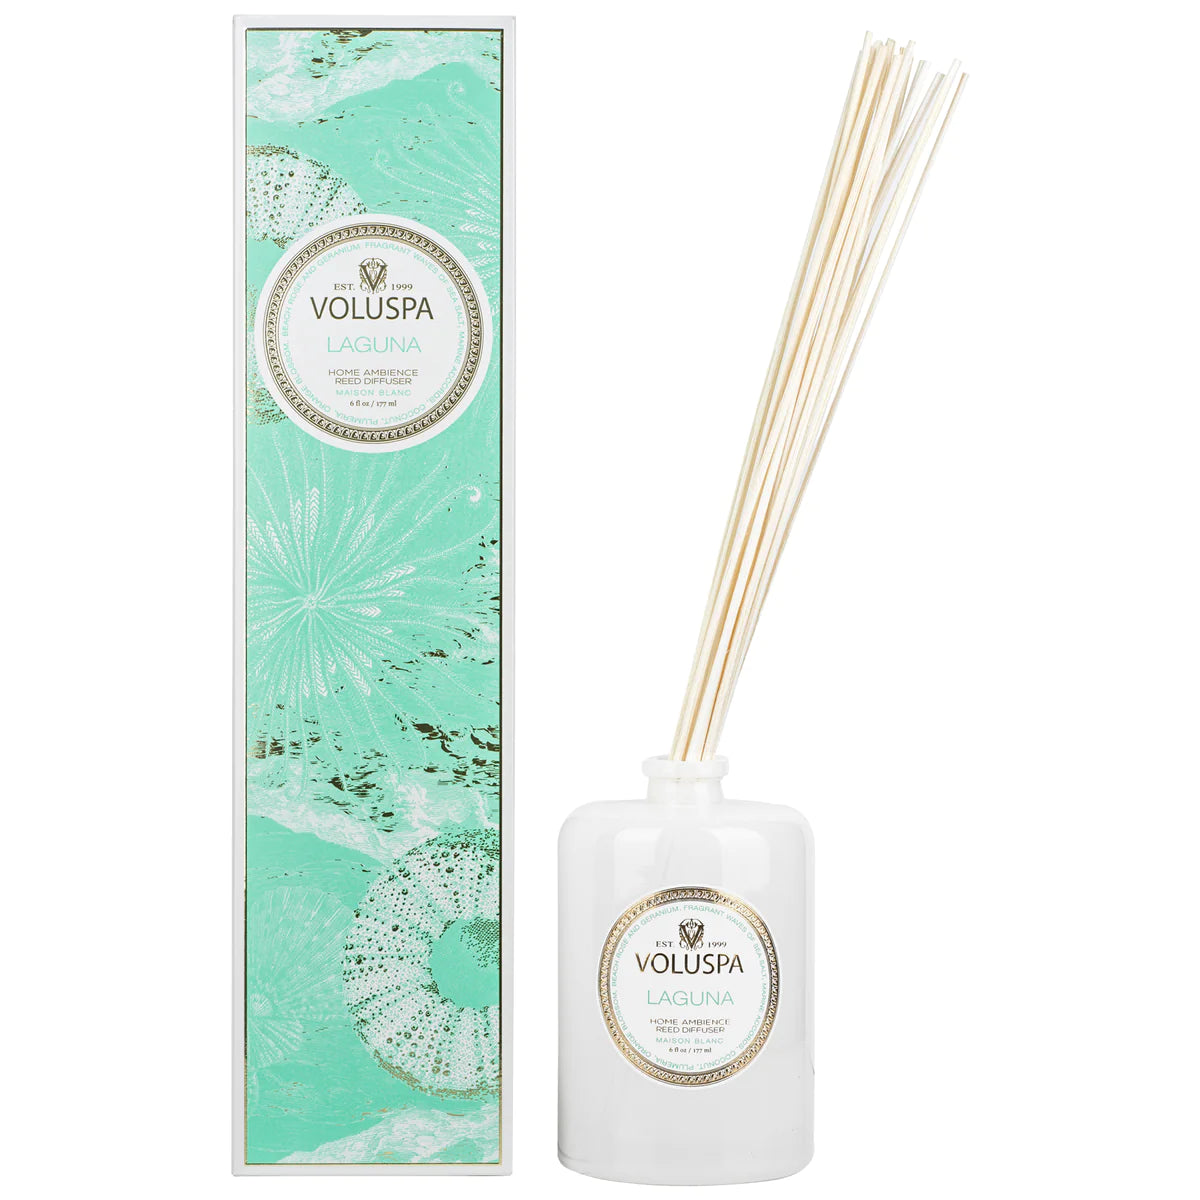 Maison Reed Diffuser